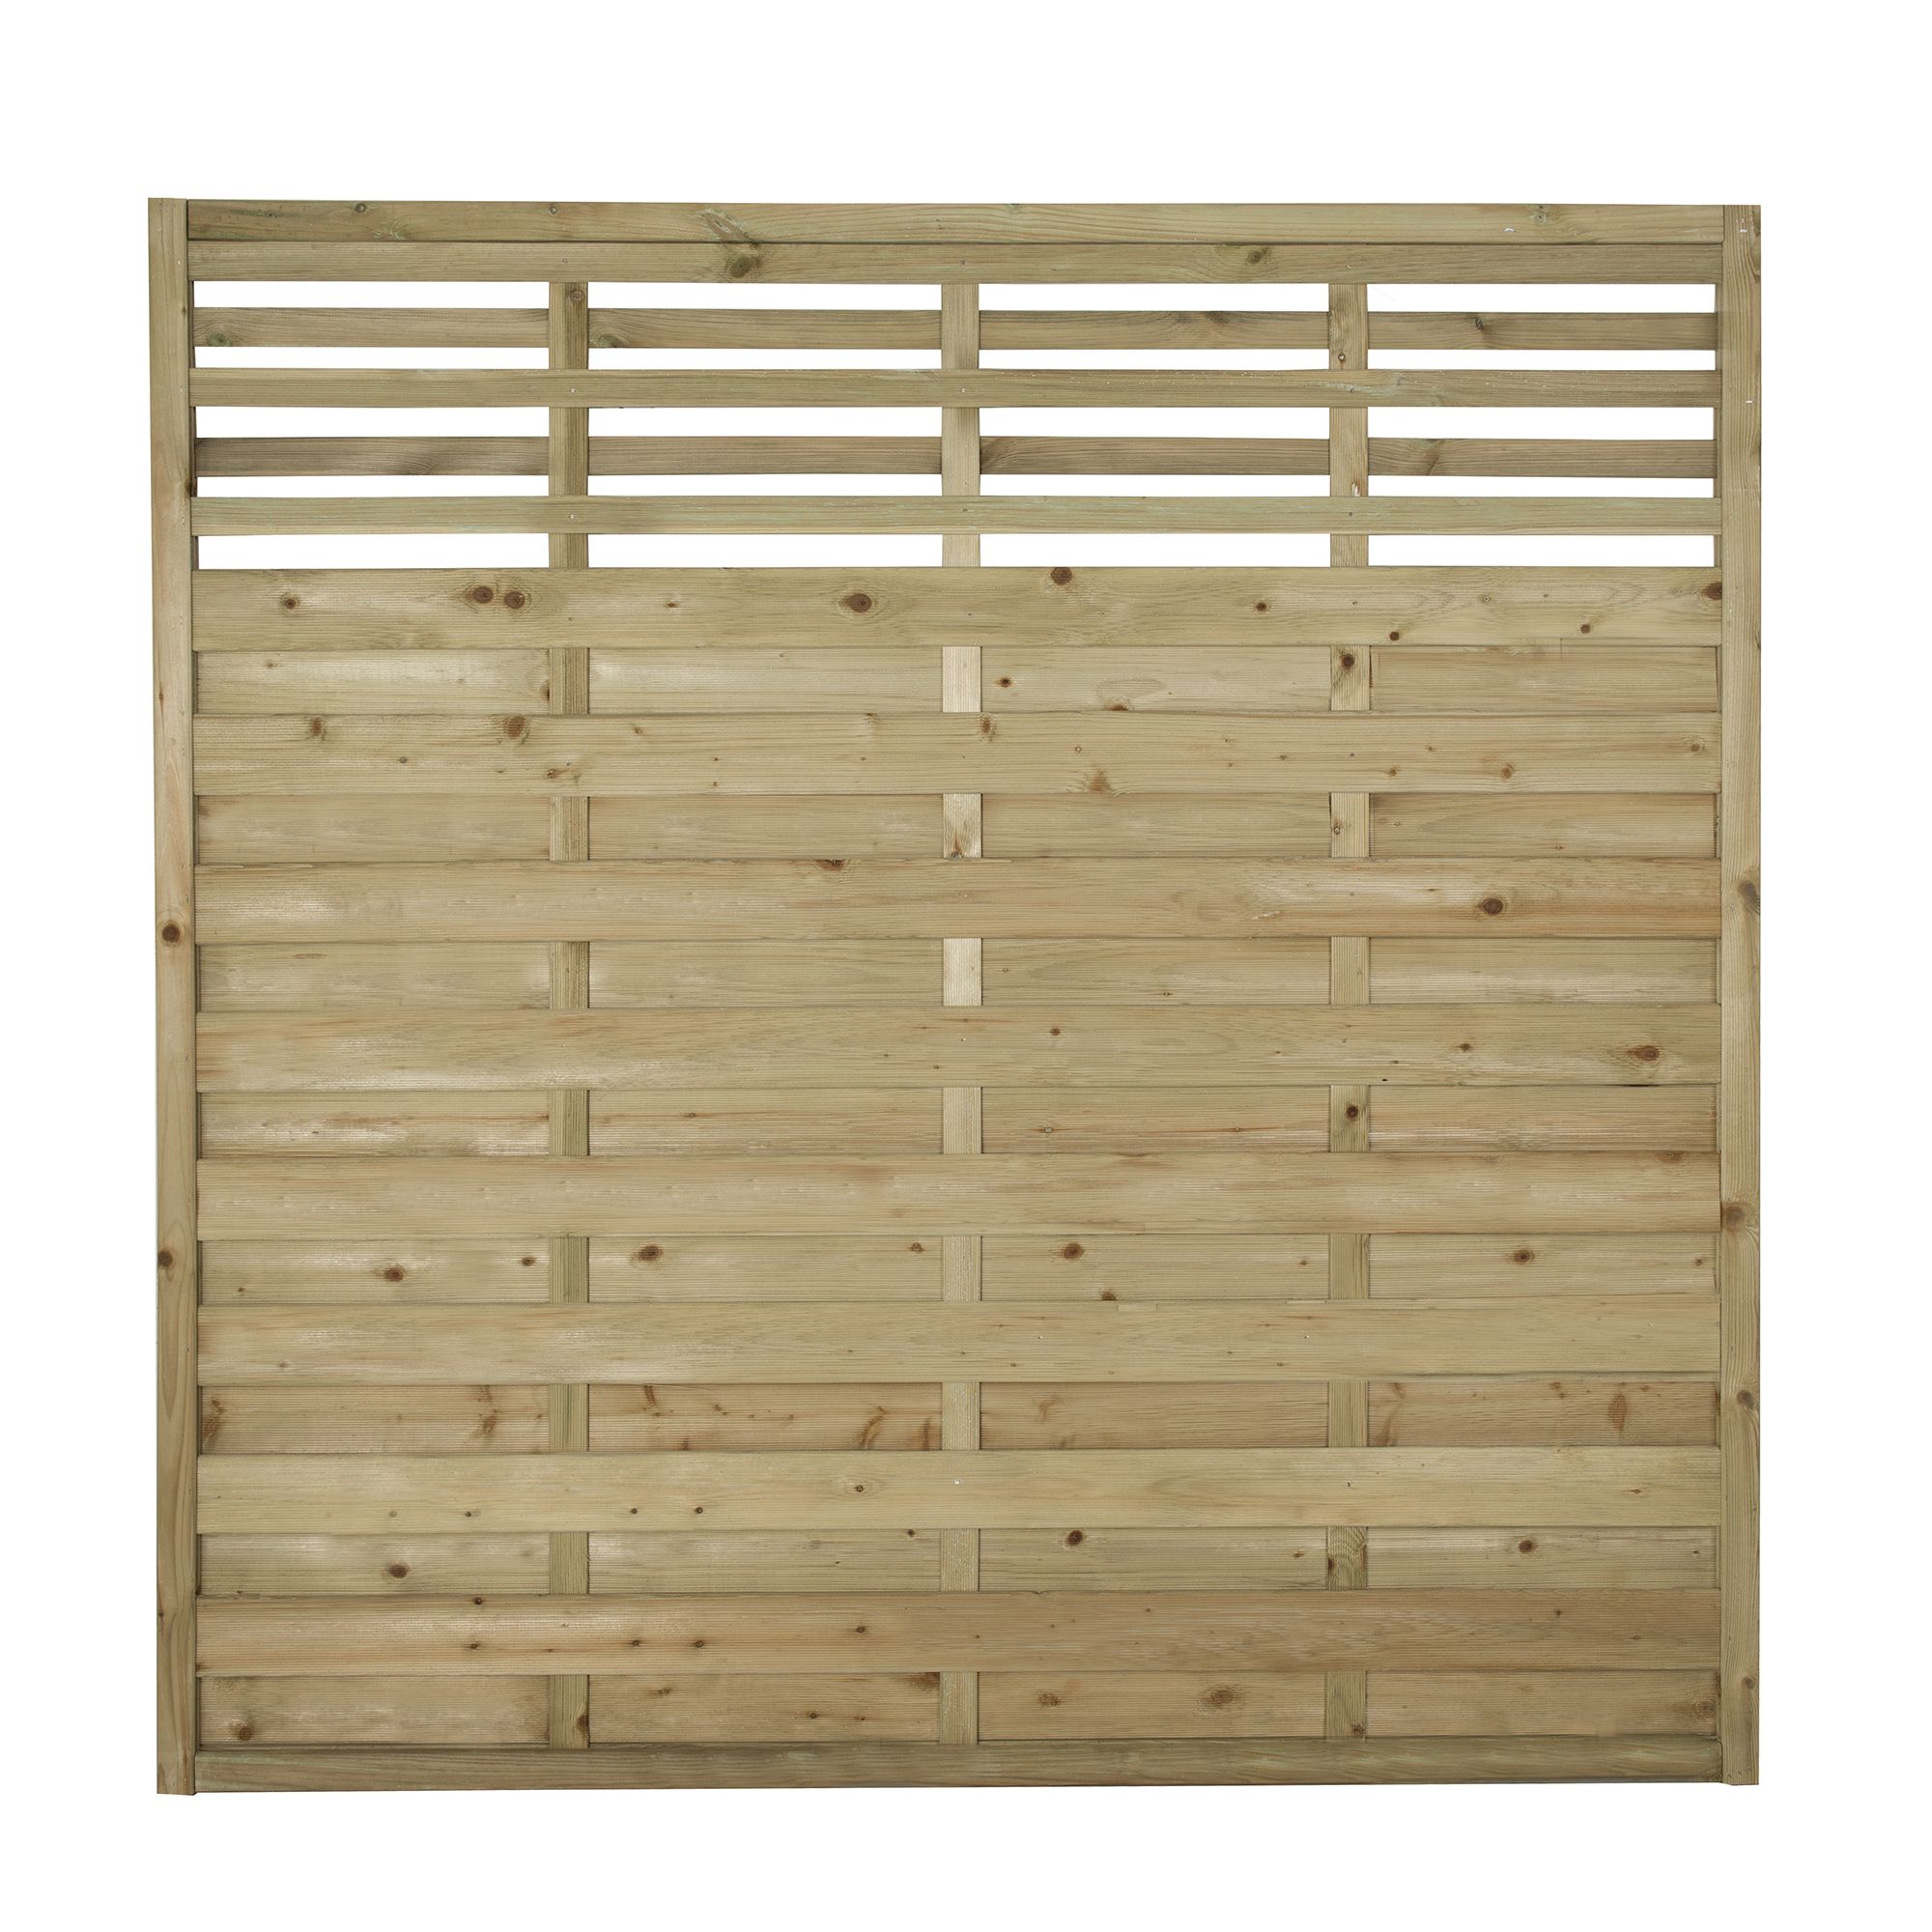 Forest Garden Contemporary Slatted Pressure treated Wooden Fence panel (W)1.8m (H)1.8m, Pack of 3